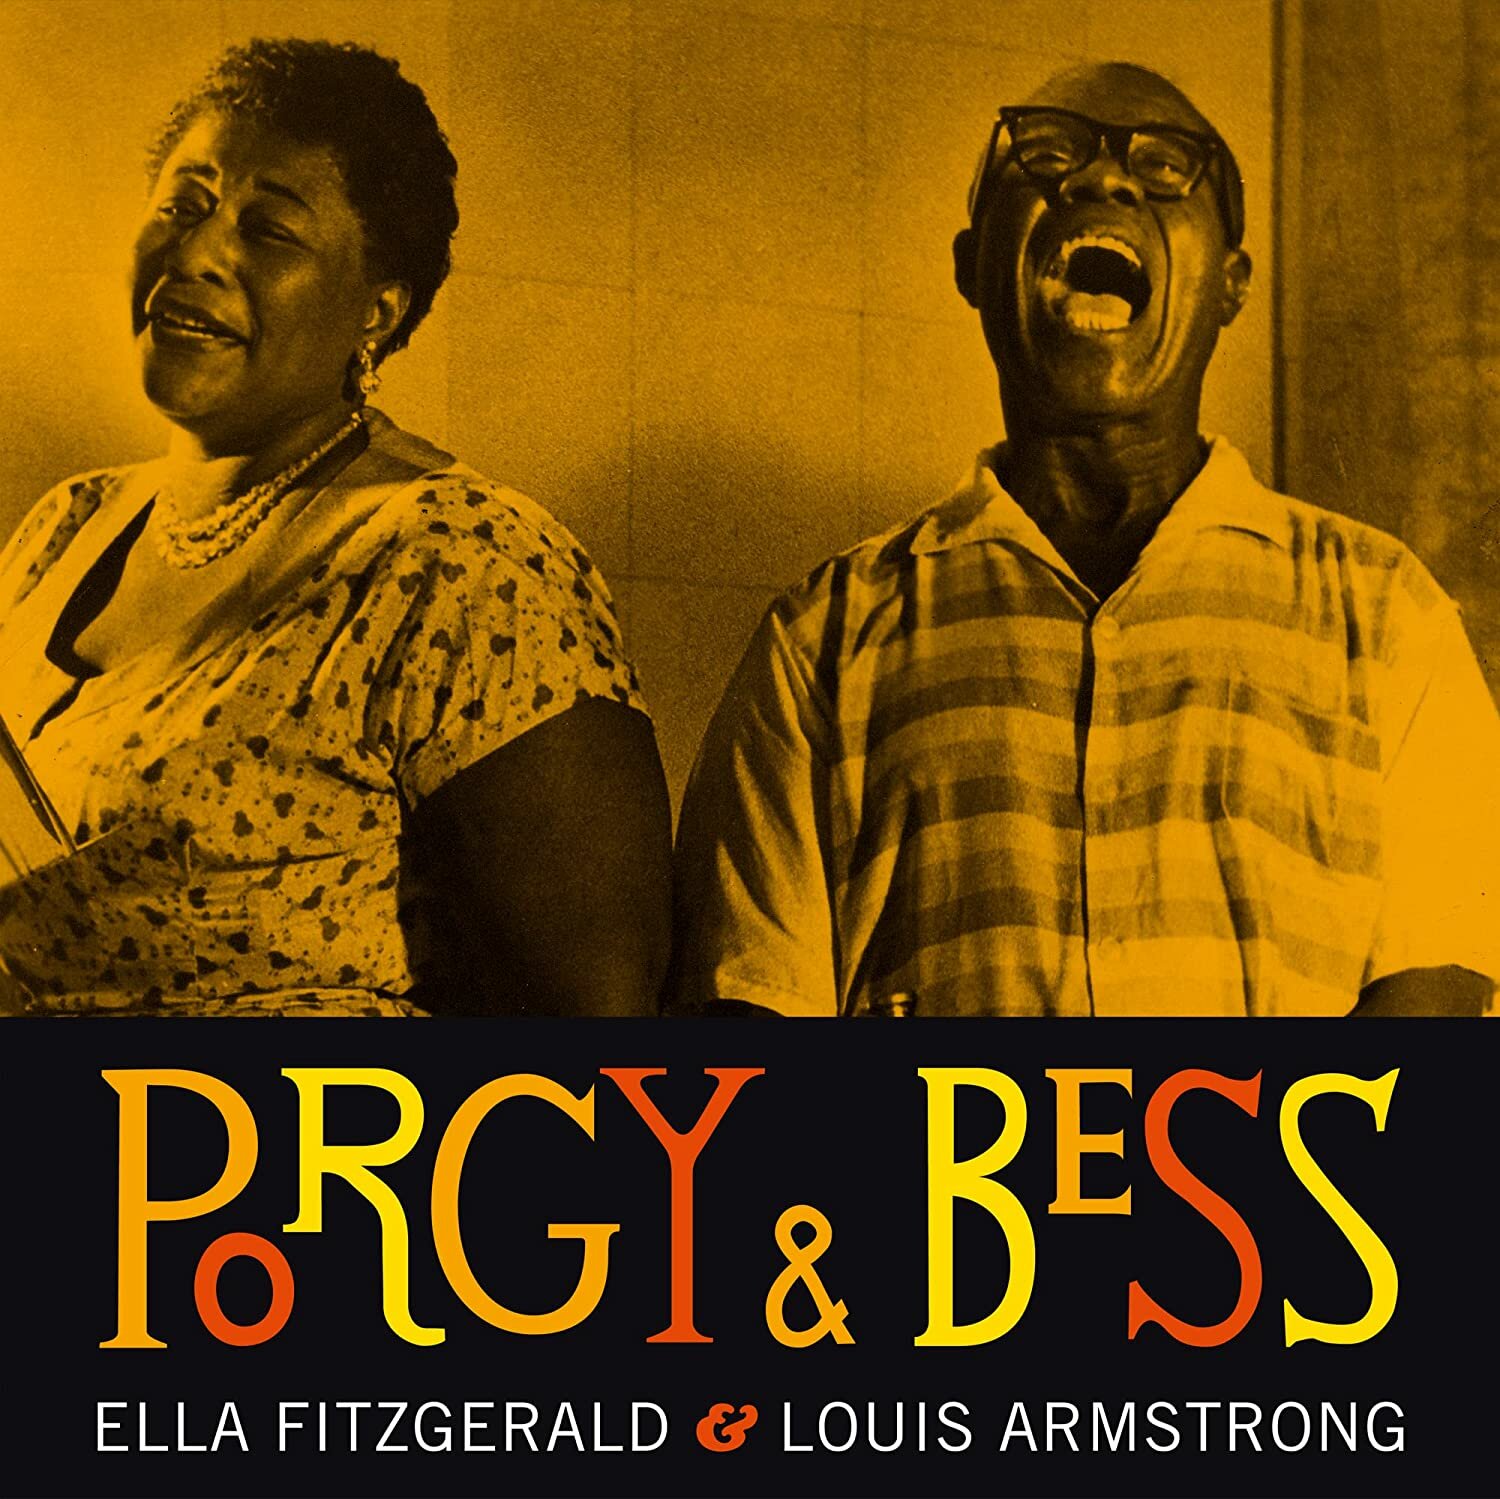 Fitzgerald Ella & Armstrong Louis "Виниловая пластинка Fitzgerald Ella & Armstrong Louis Porgy And Bess"